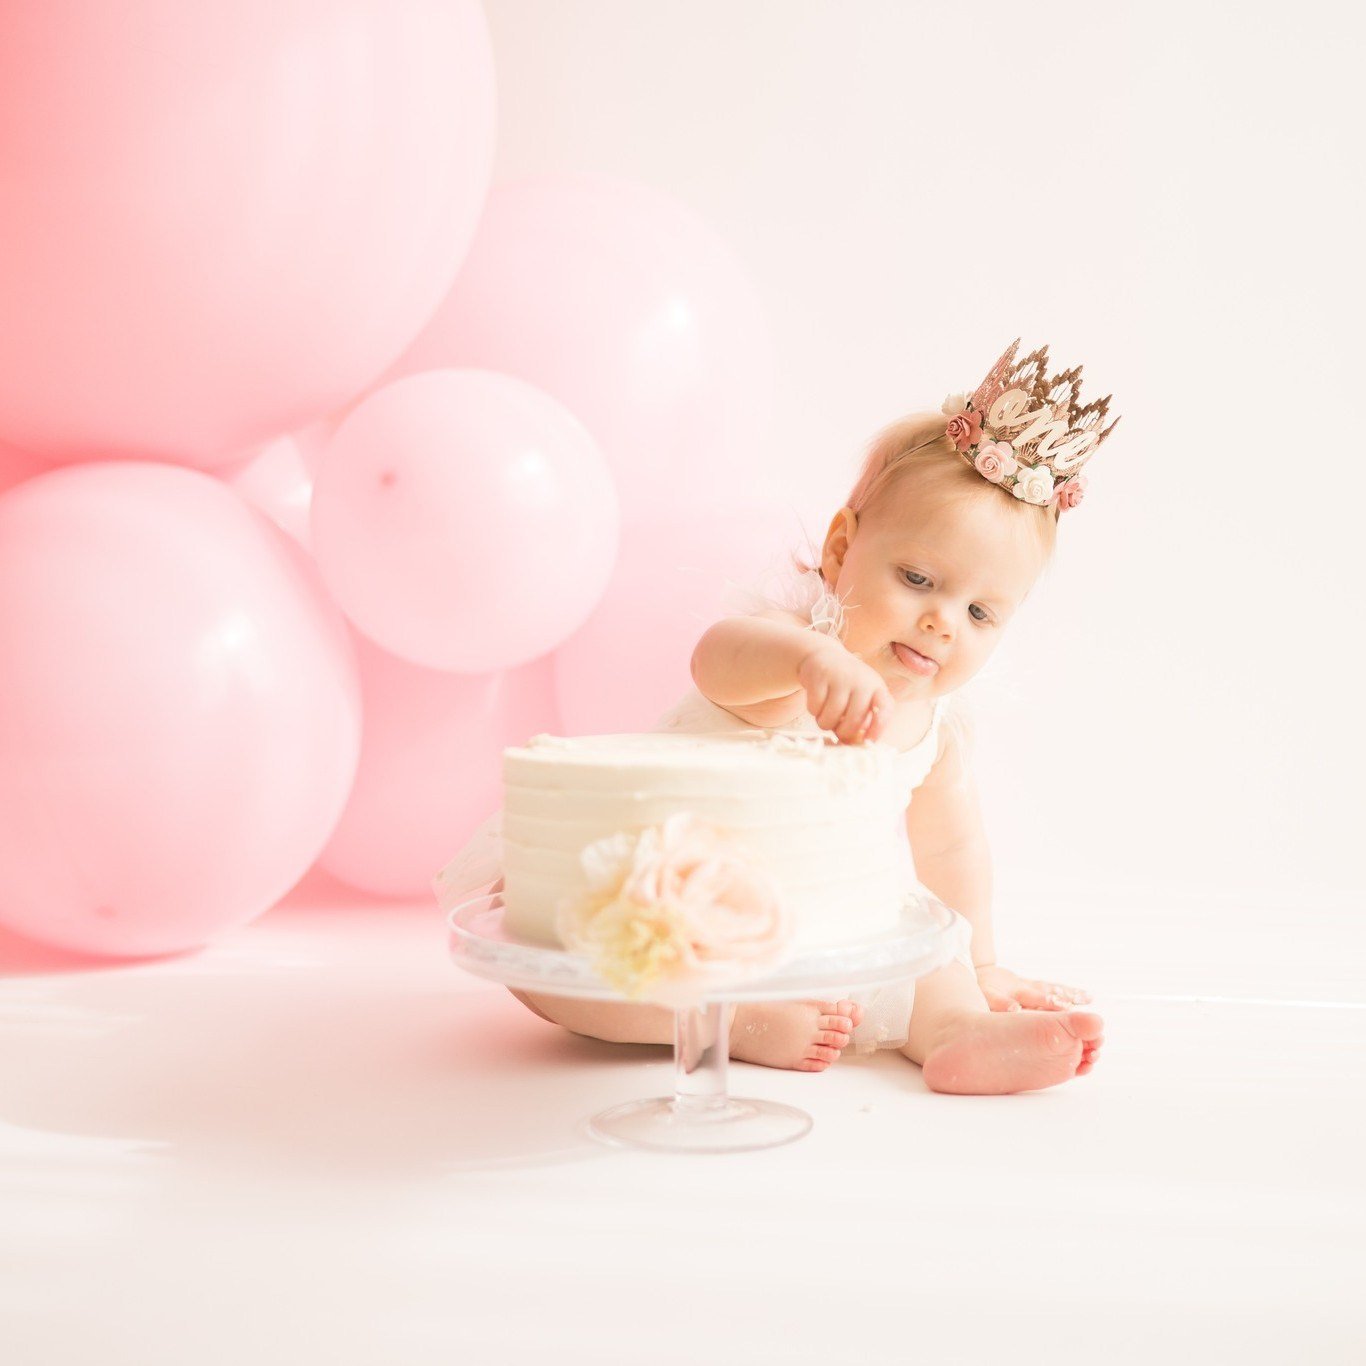 Turning one: where the cake is bigger than you, the wrapping paper is more exciting than the gifts, and everyone cheers for you to smash food on your face without judgment. 🎉🎂 Happy One Year, Amelia!